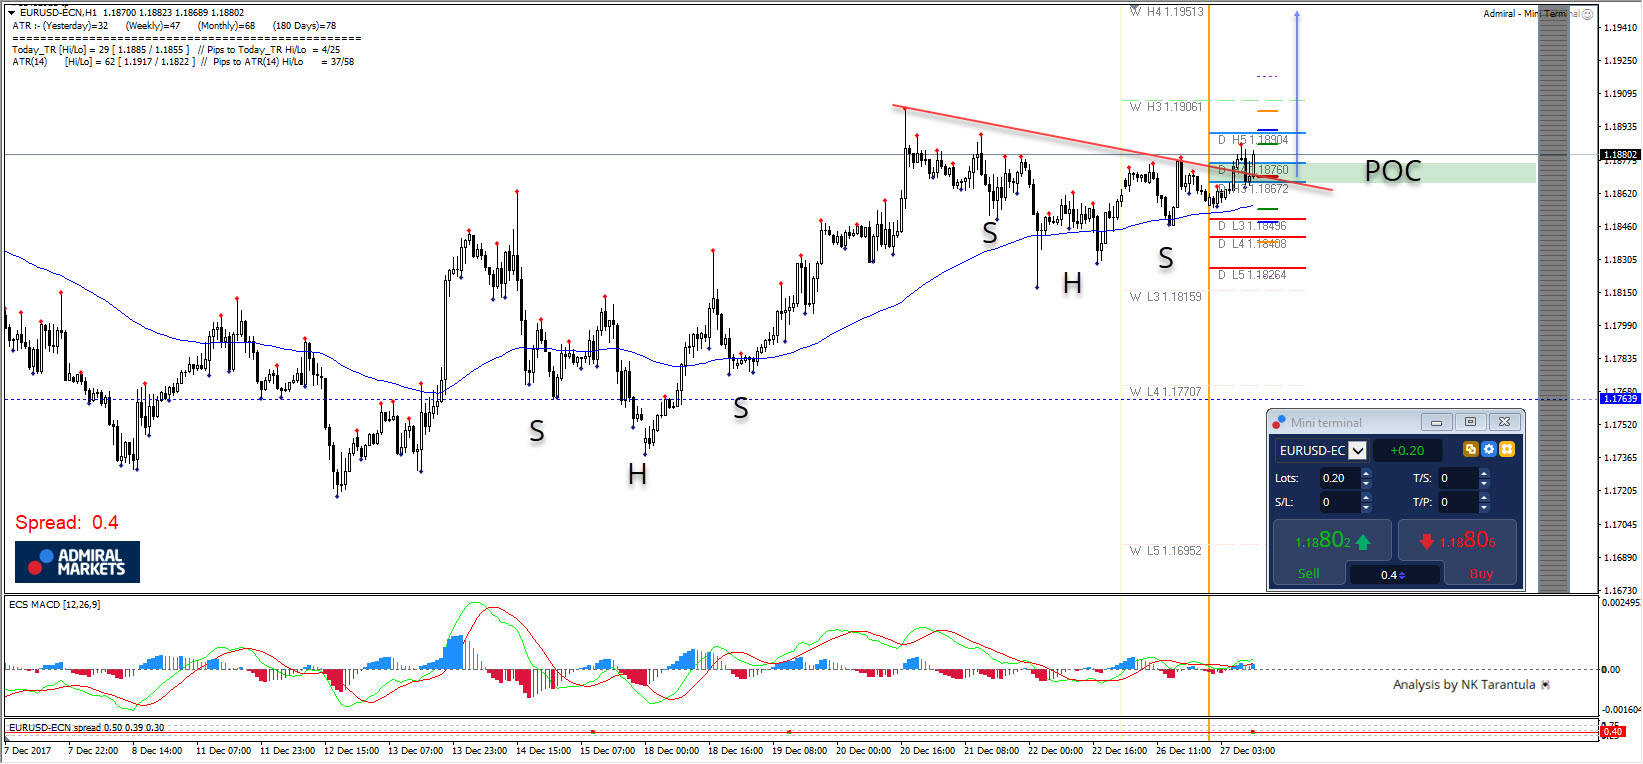 EUR/USD Buying the Dip Continues During Holidays